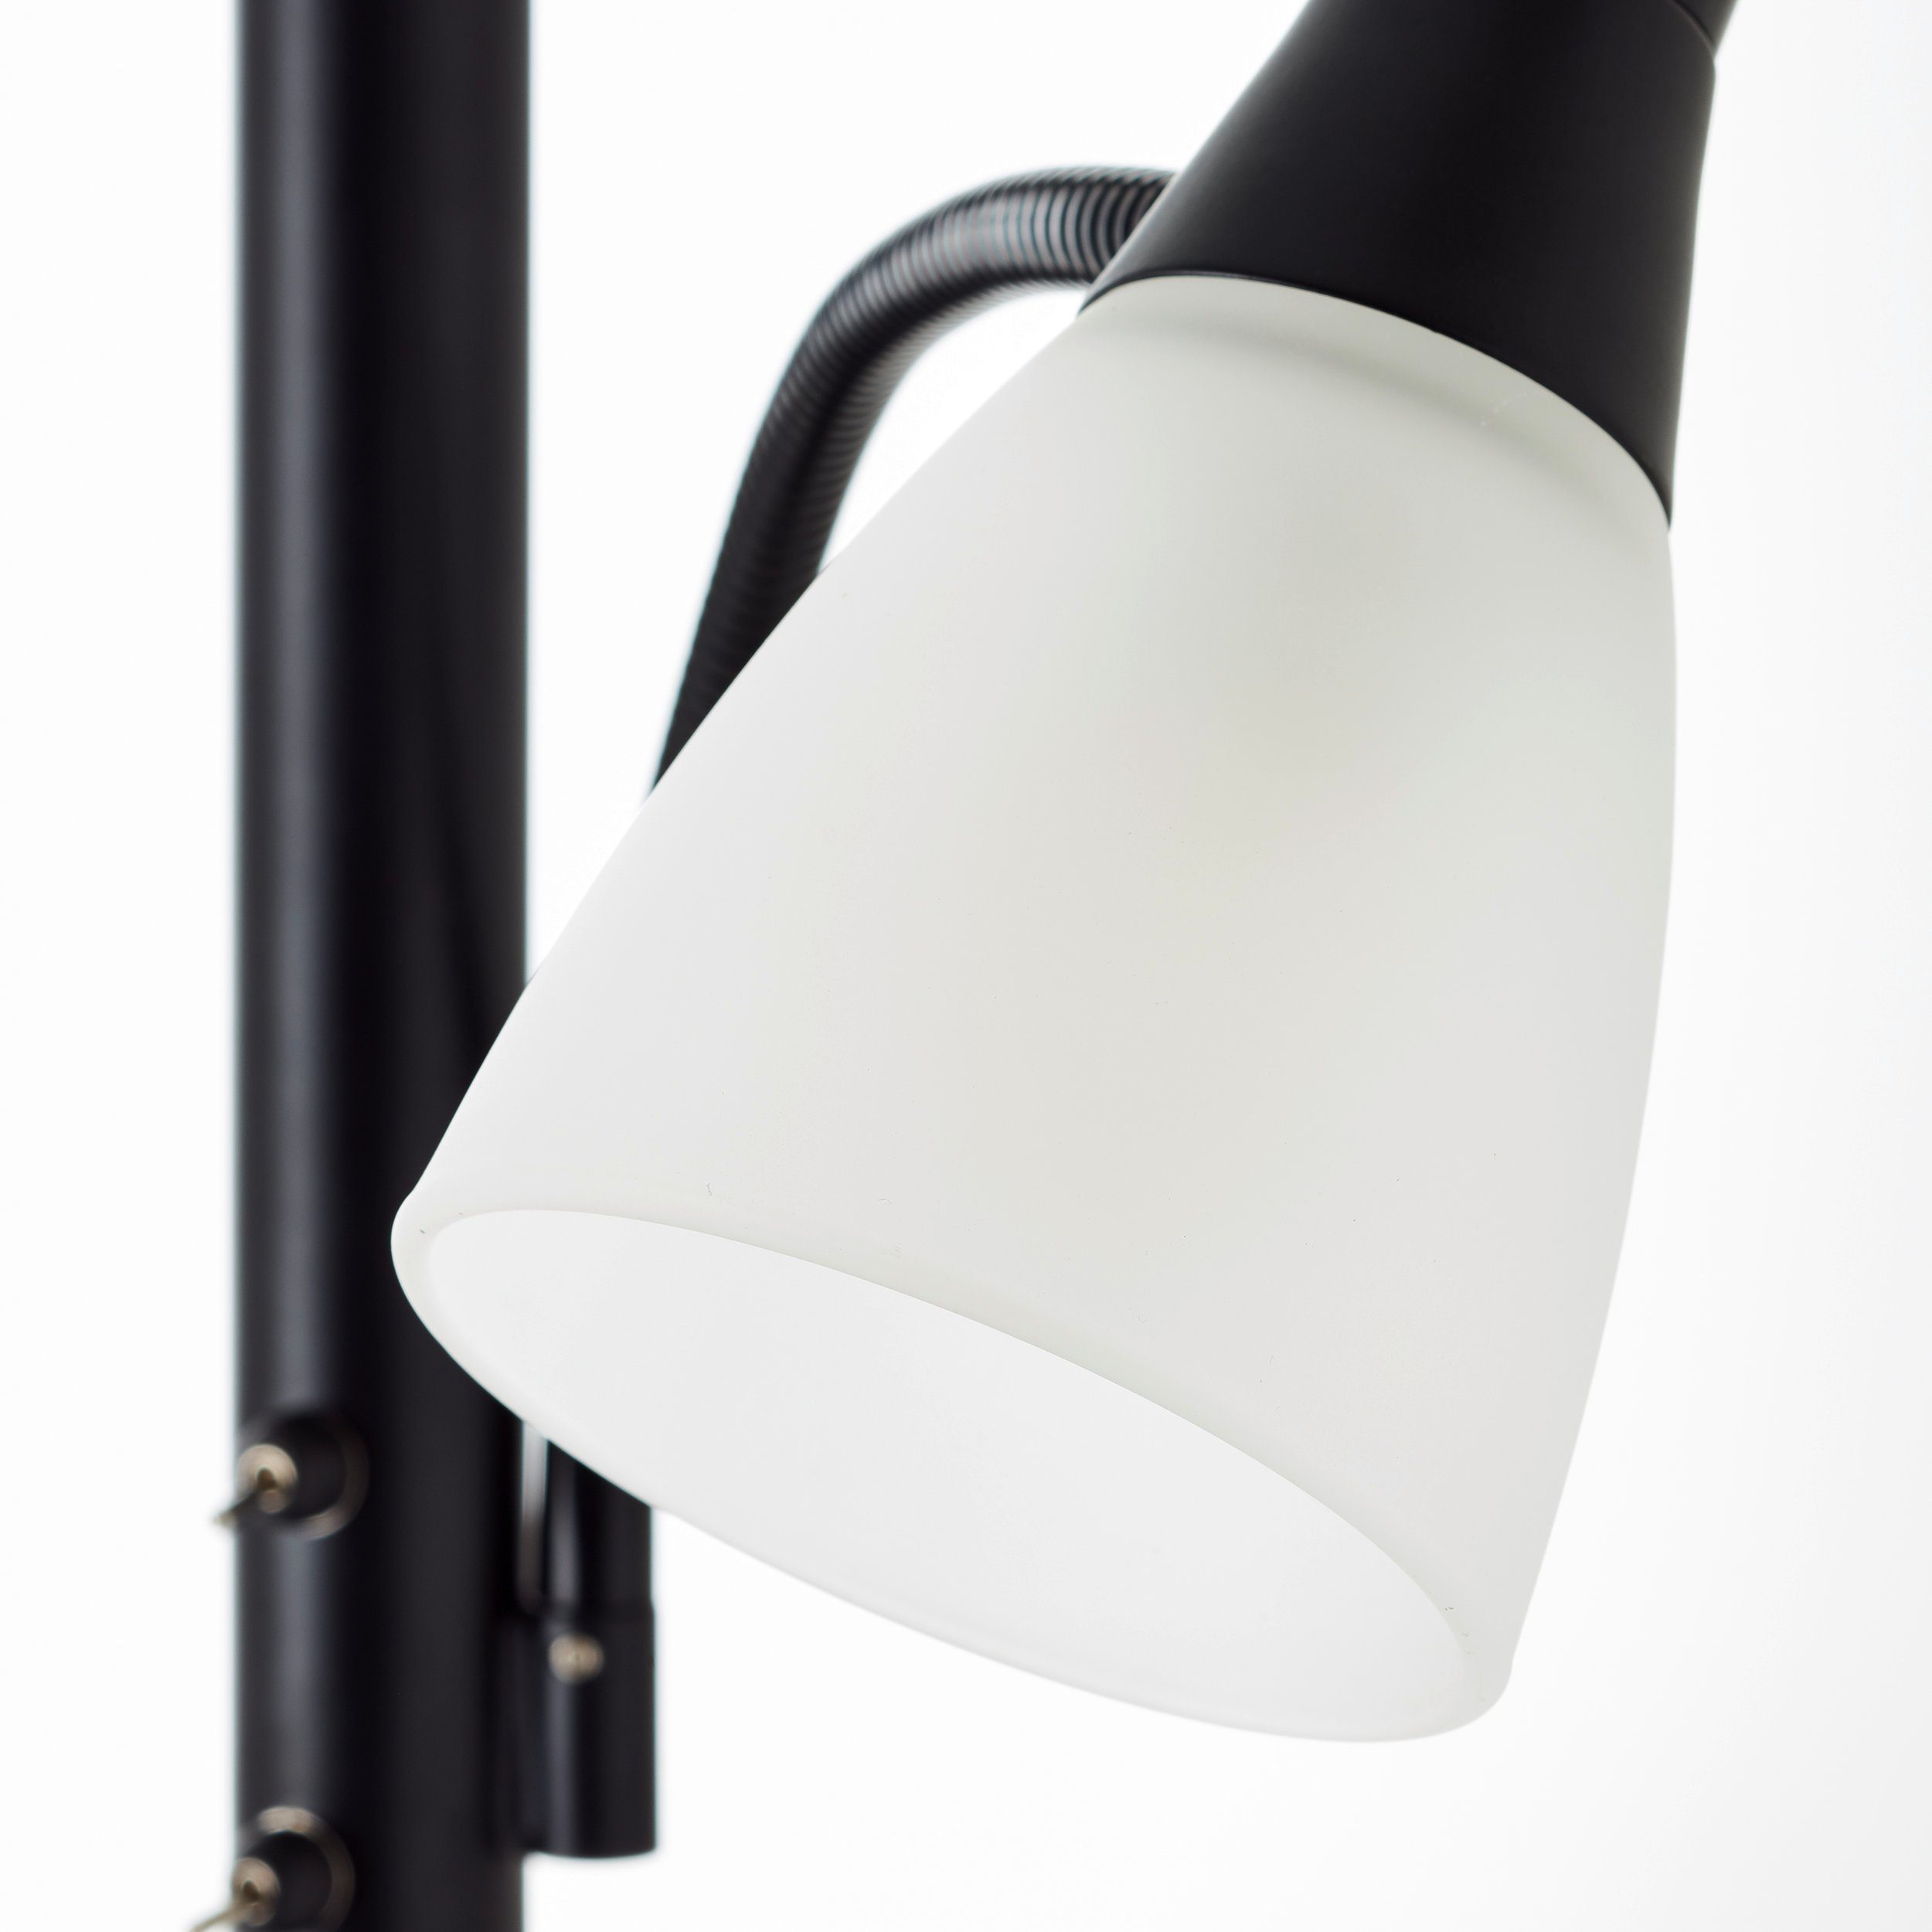 Deckenfluter schwarz, Brilliant A60, 5 W Stehlampe Metall/Glas, Lesearm LED 1x Lucy, E27, Lucy